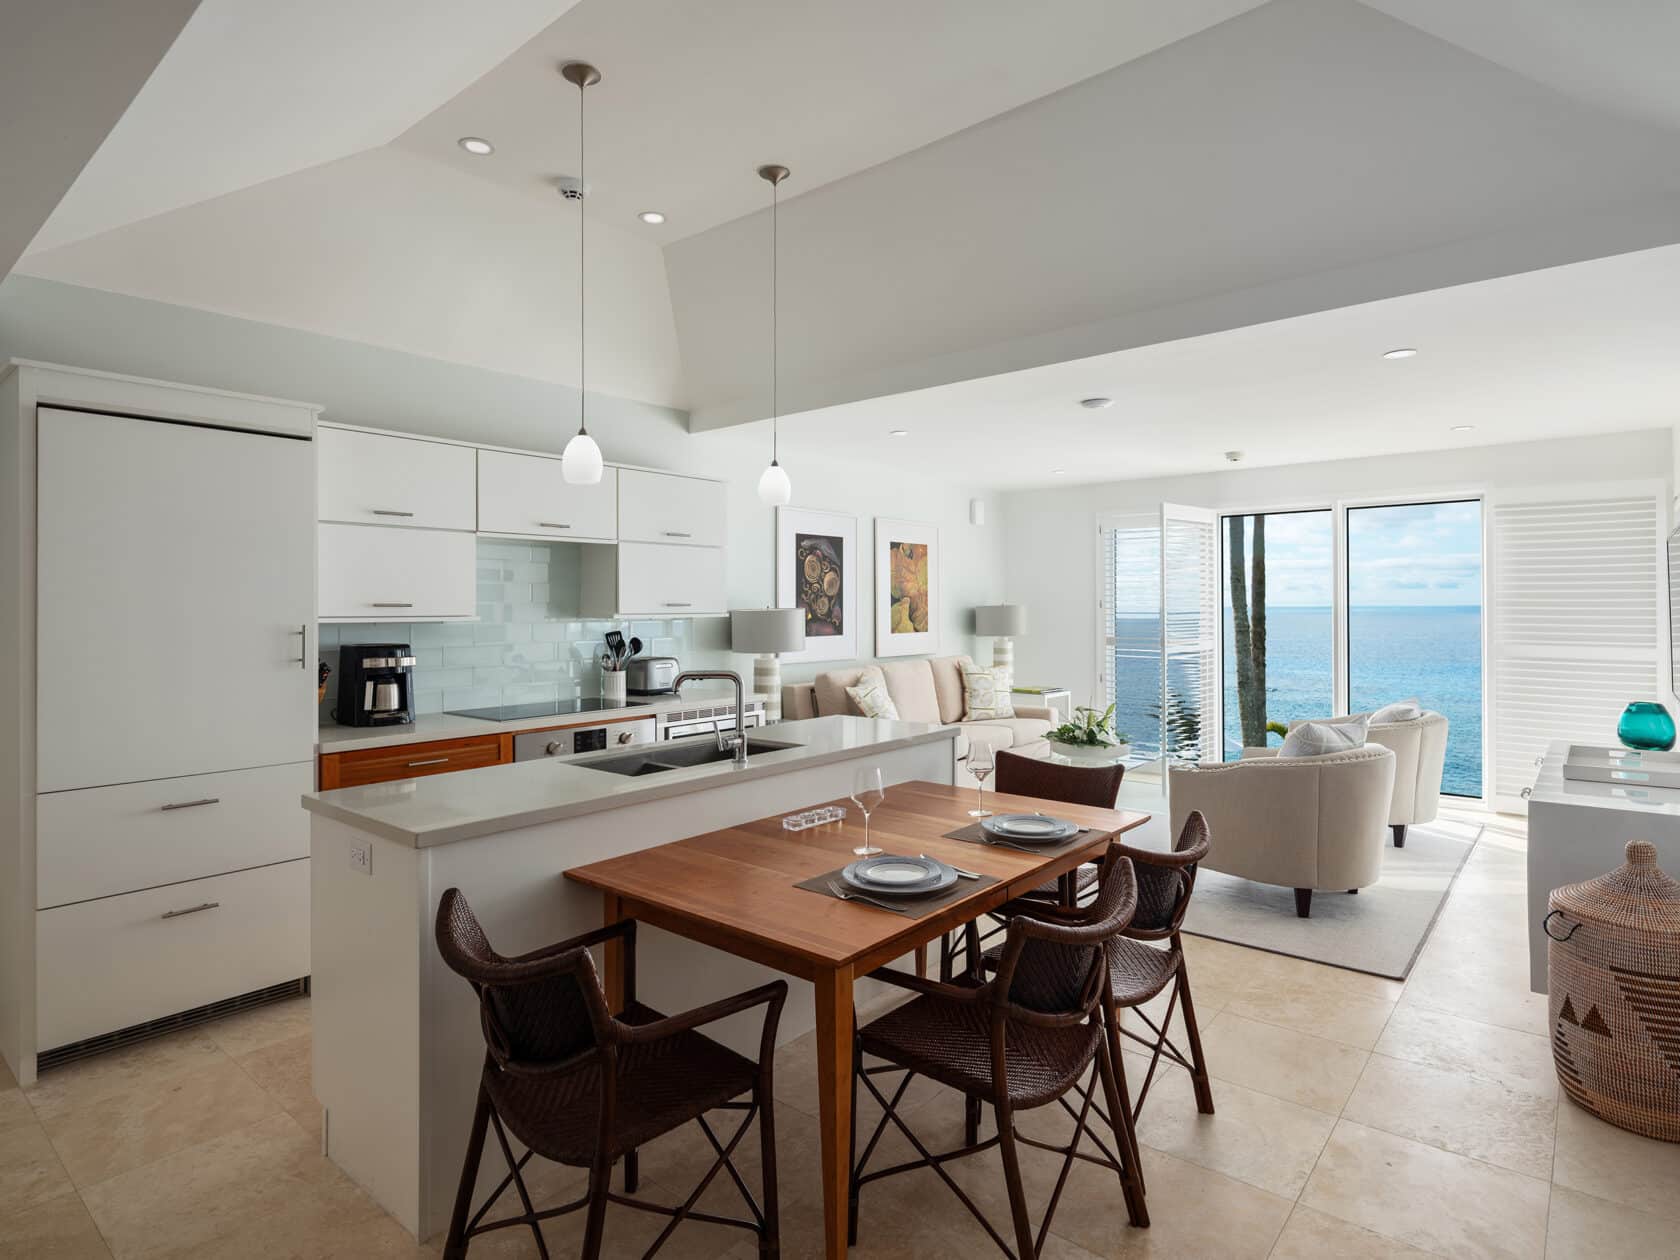 A kitchen and dining area with a view of the ocean, perfect for Bermuda vacation rentals.